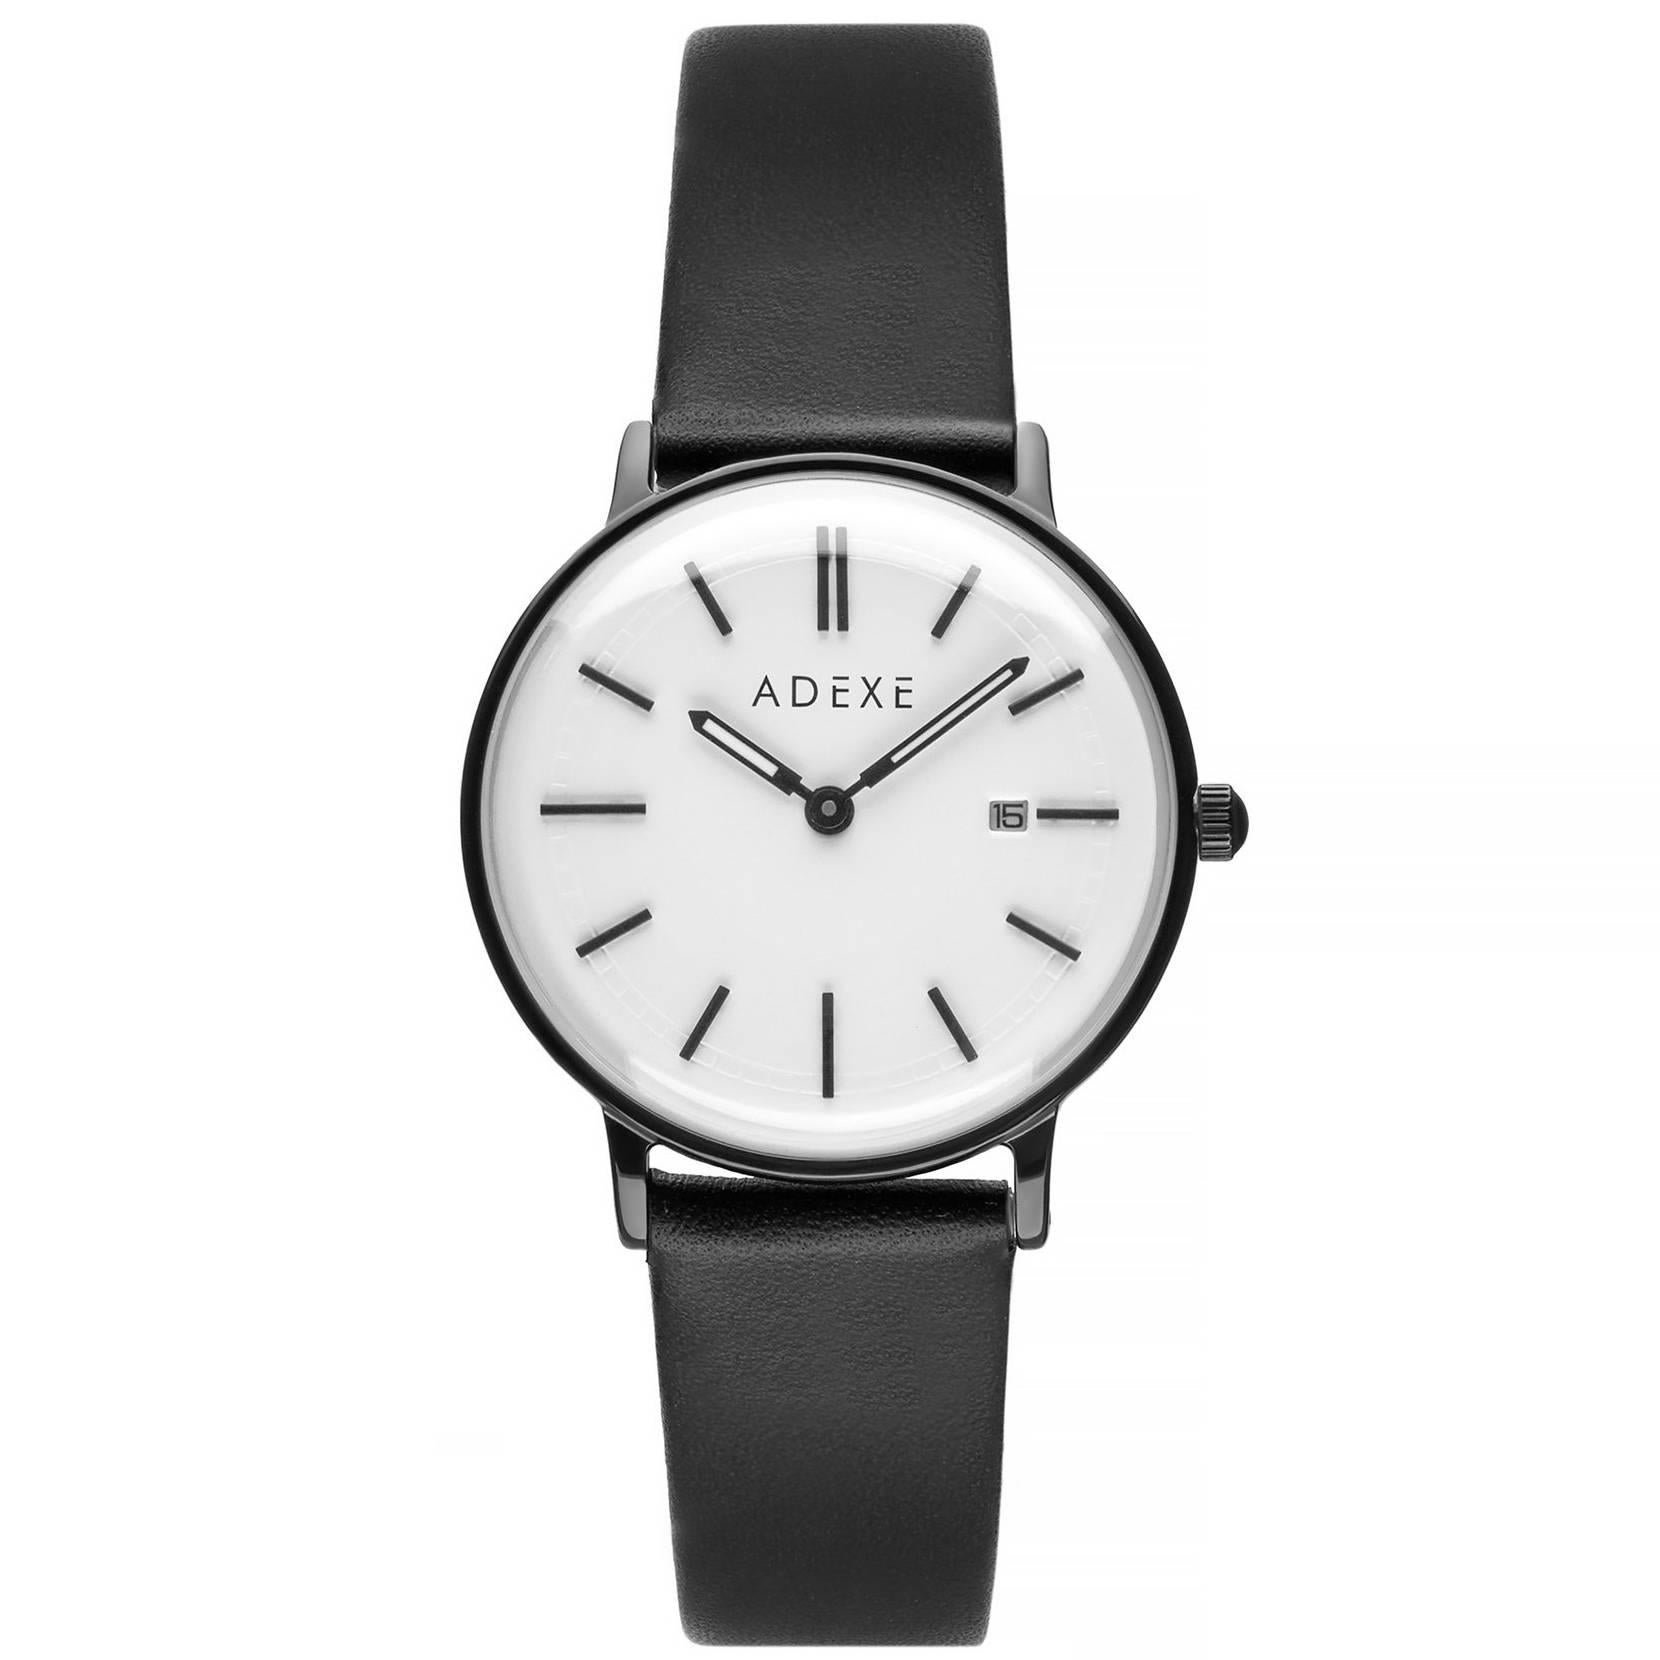 Adexe Stainless Steel Meek Black and White Japanese Quartz Wristwatch